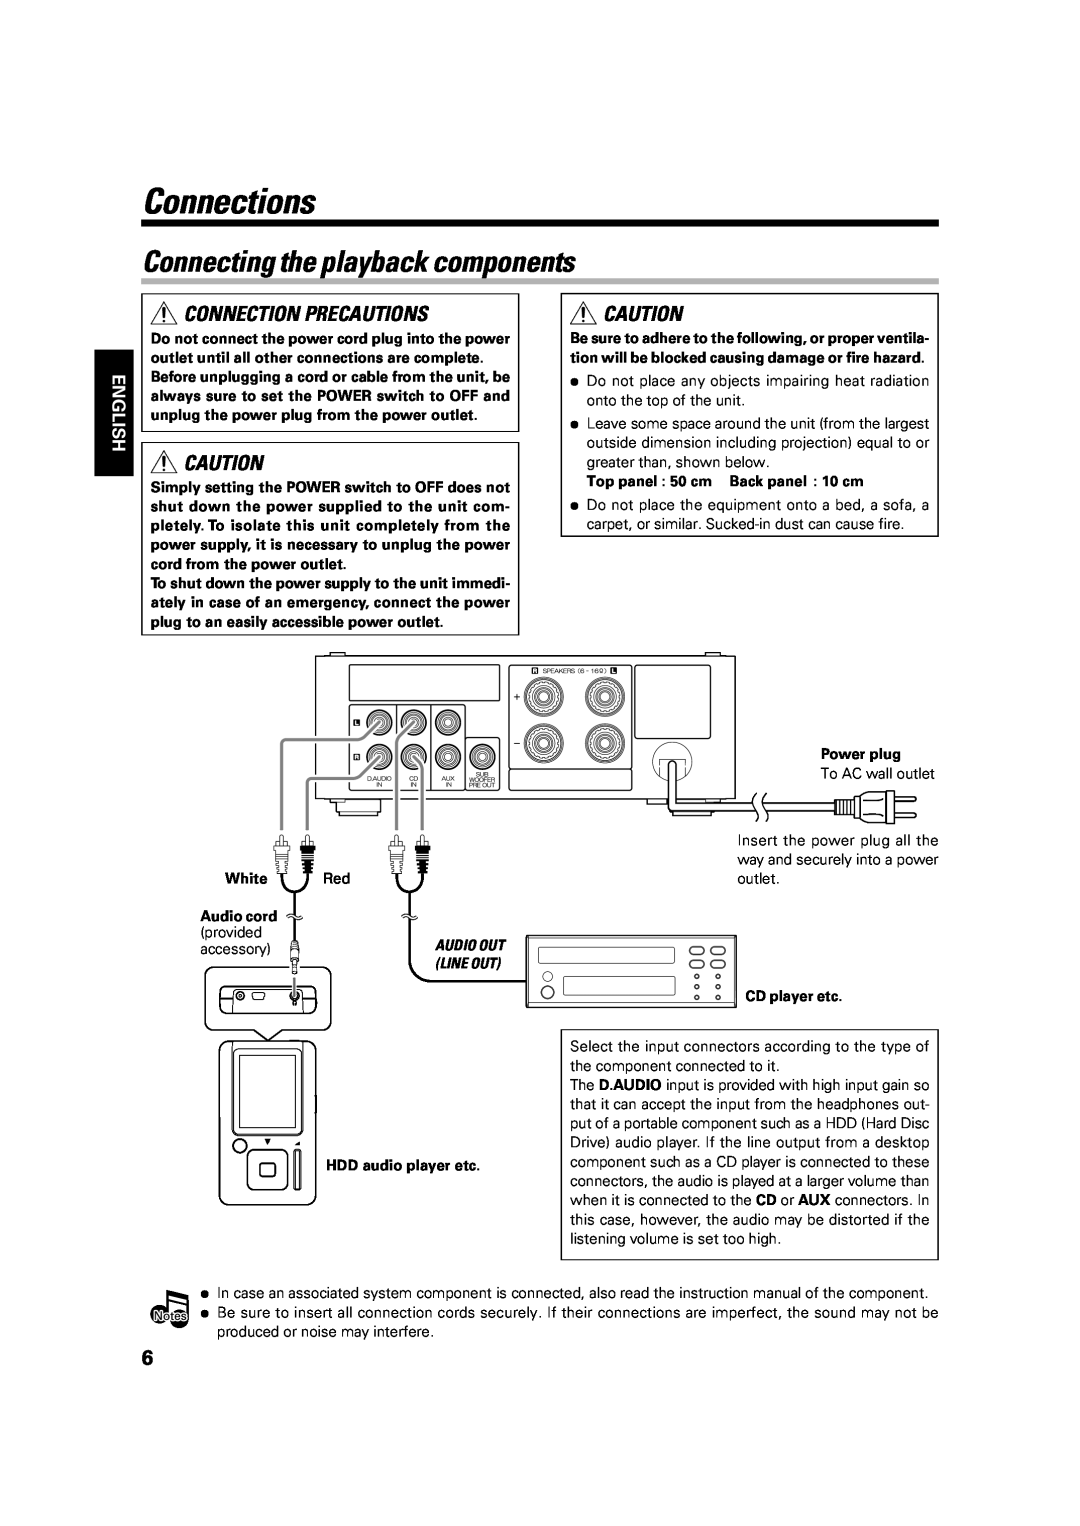 Kenwood KA-S10 instruction manual Connections, Connecting the playback components, Connection Precautions, English 